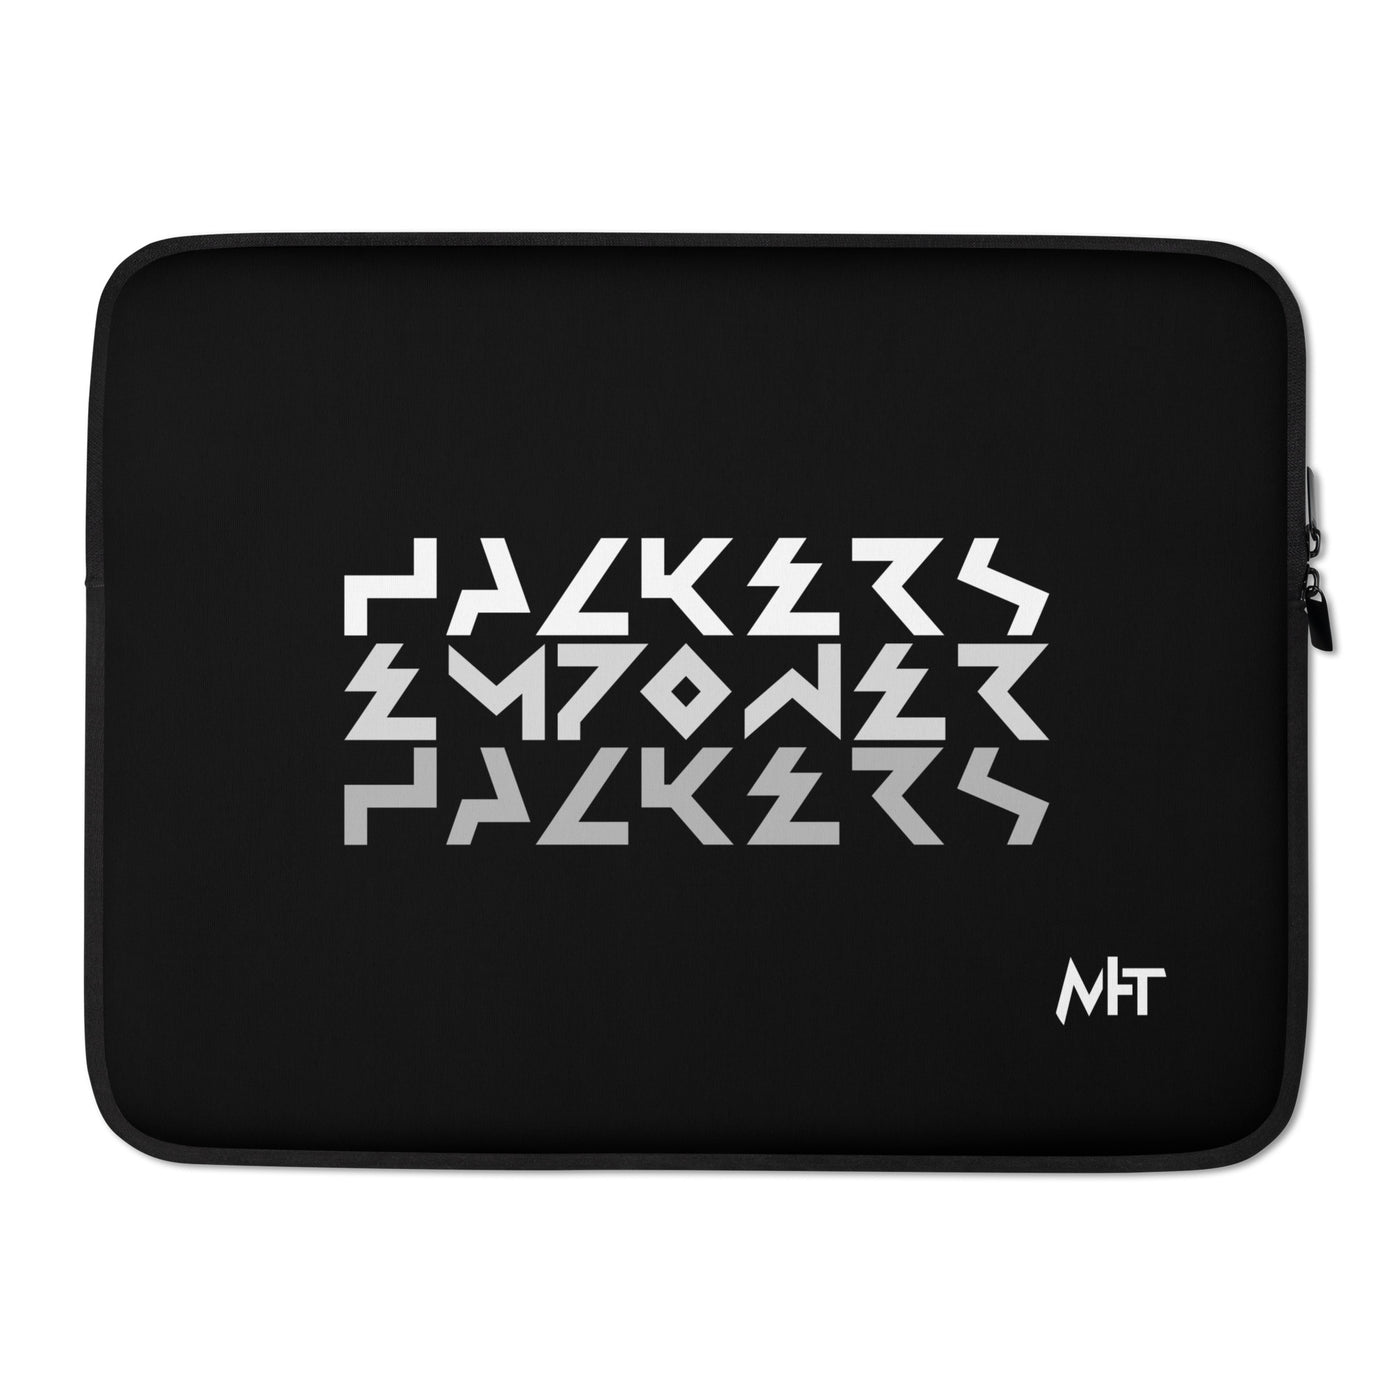 Hackers Empower Hackers V4 - Laptop Sleeve